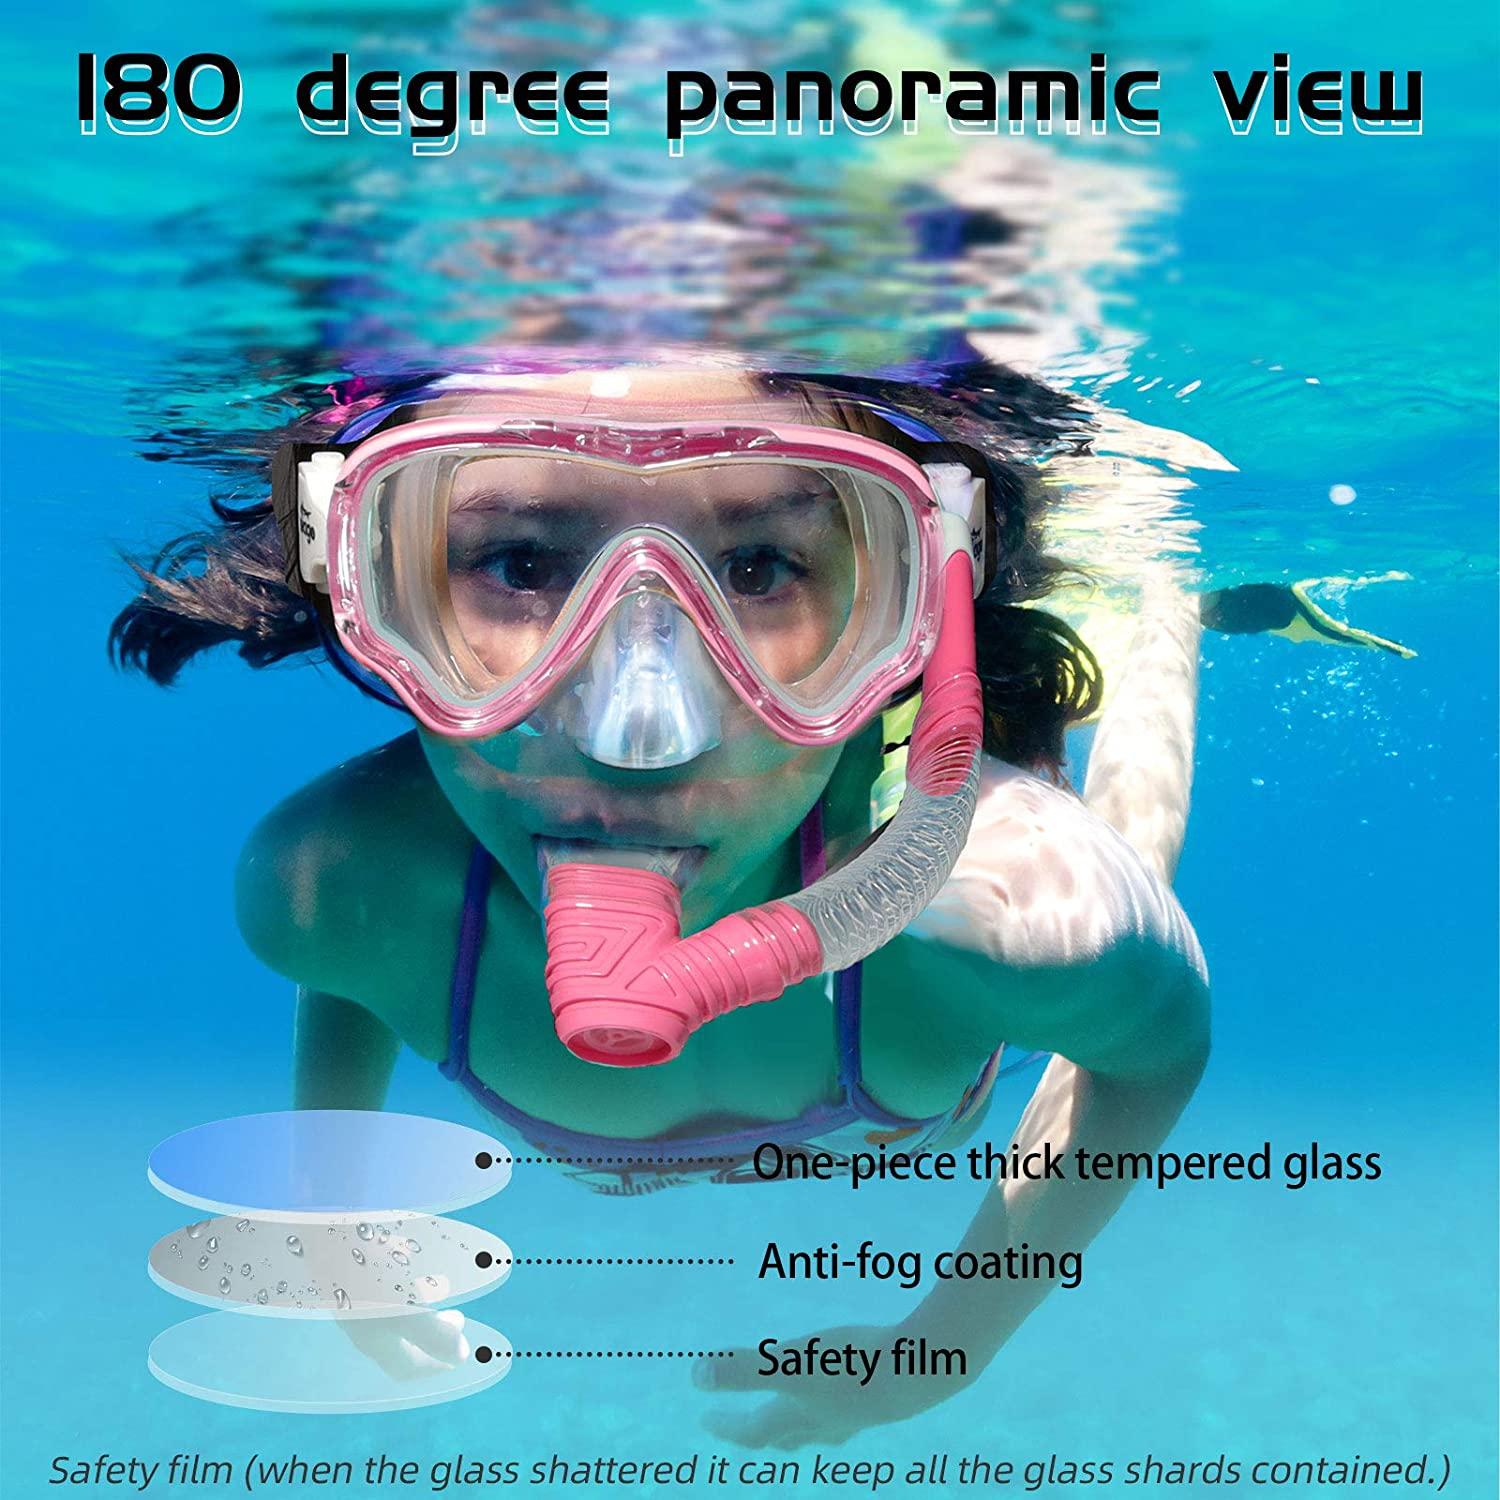 Seago Swim Snorkel for Lap Swimming, Dry Top Front Swimmer Snorkel